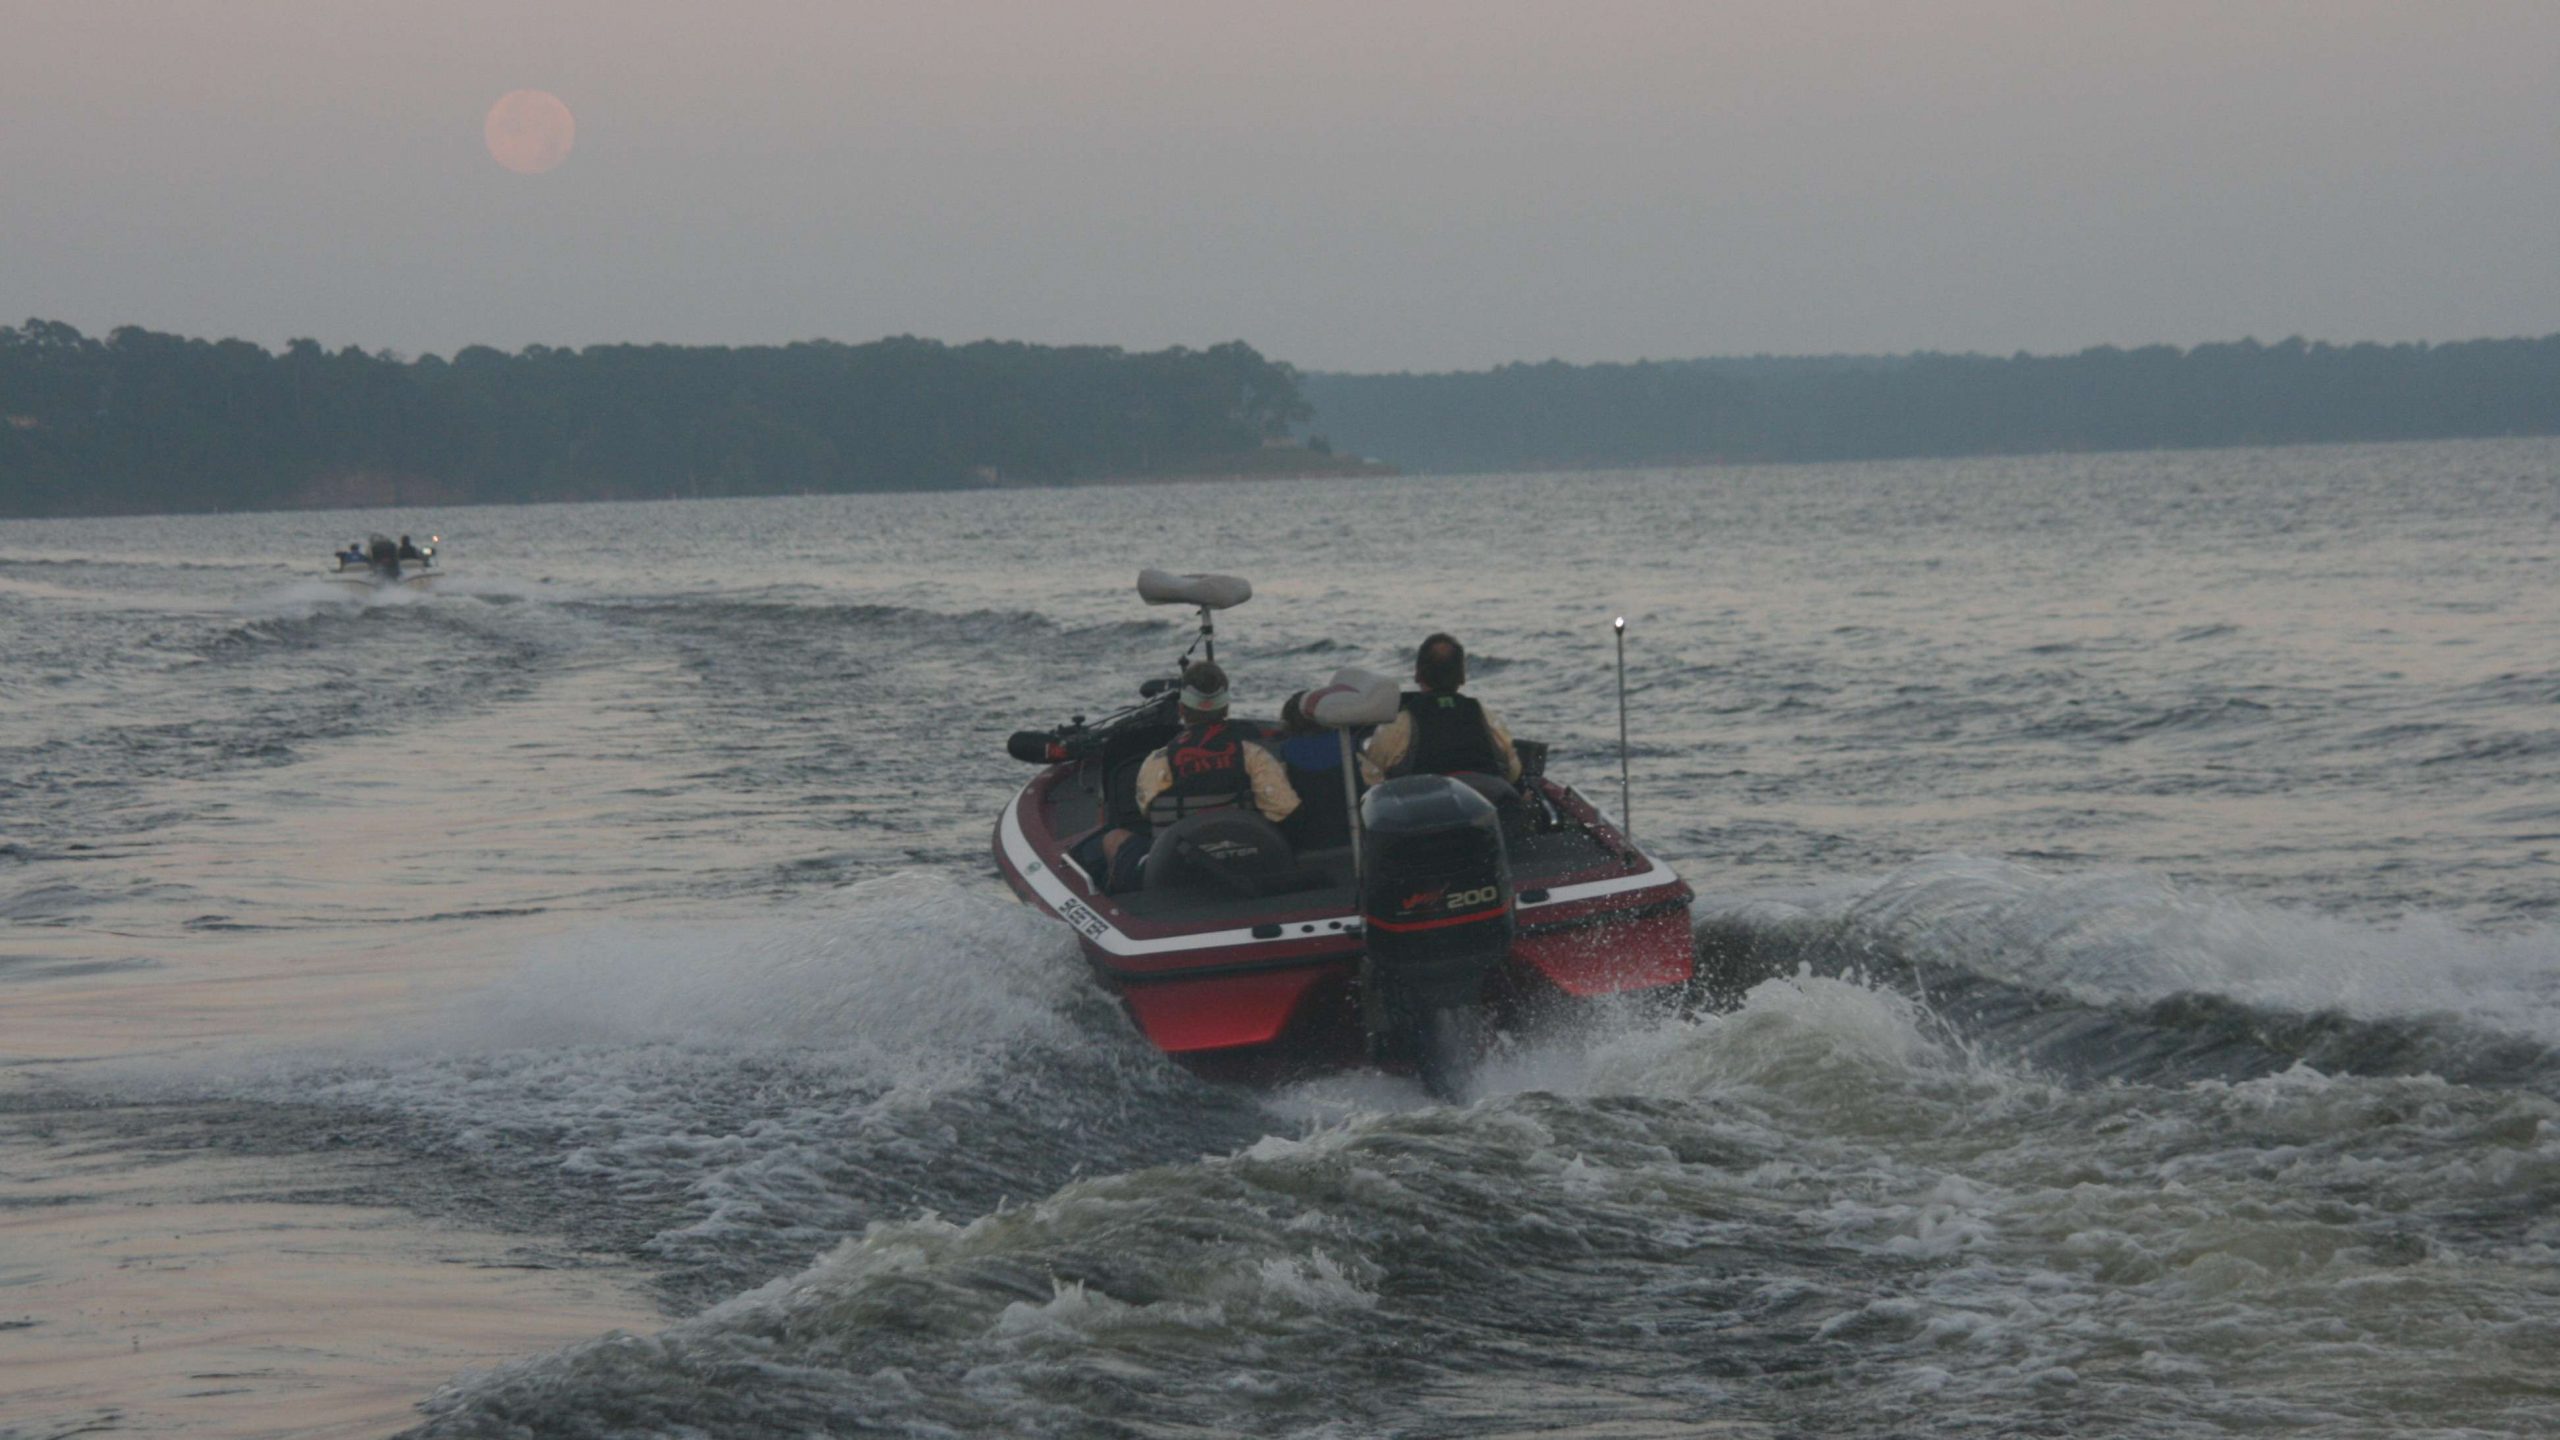 As soon as they are a safe distance from the dock, the boats fire up the outboards and shoot off across the water.